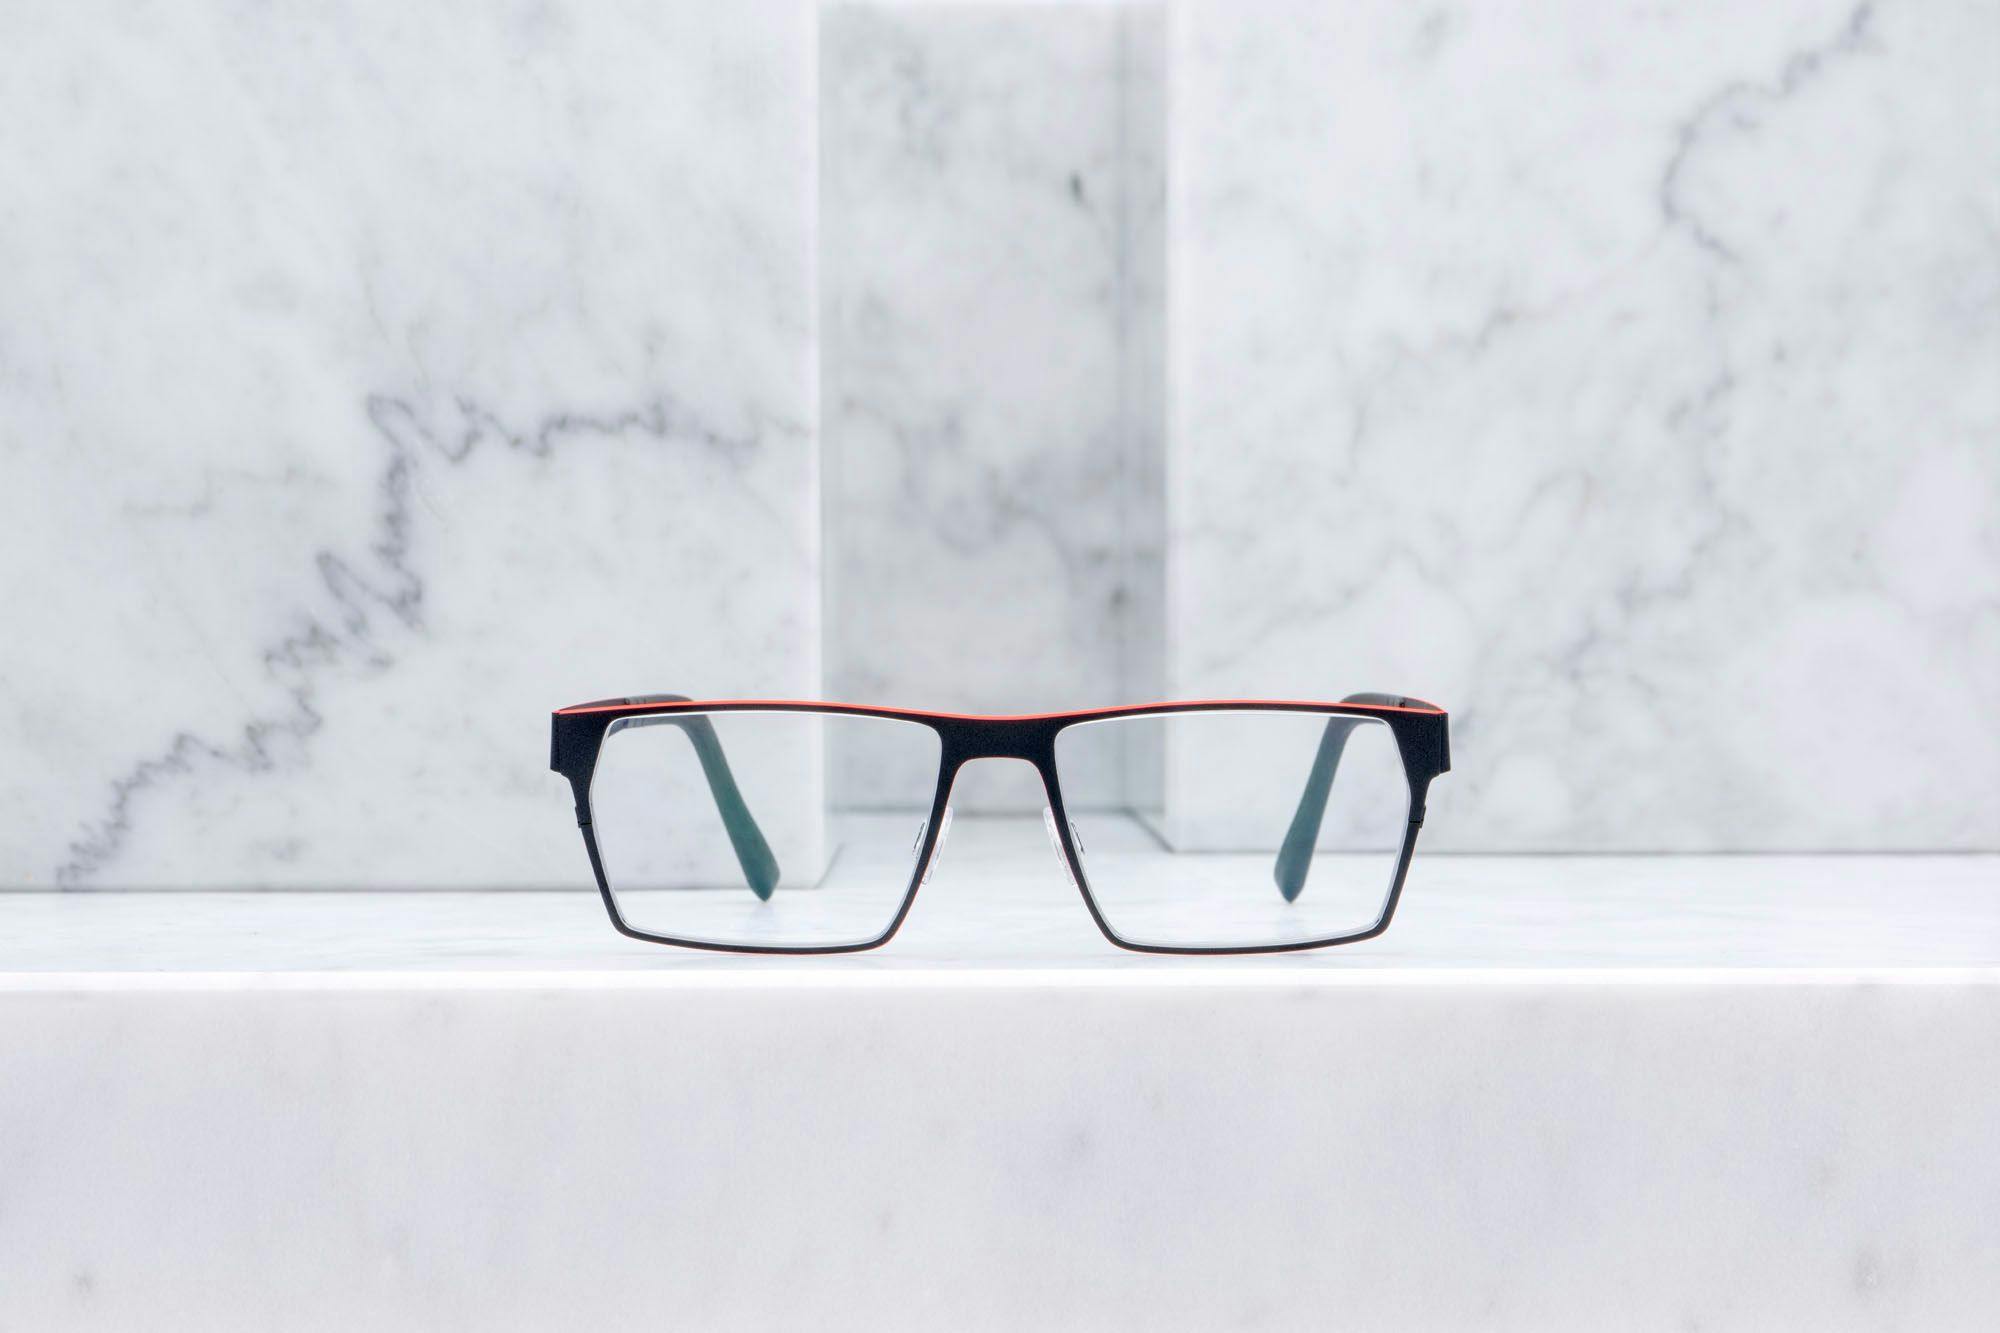 Compton is a clear rectangular lens with a high bridge and vivid – red, lime or green – colors along the edges.